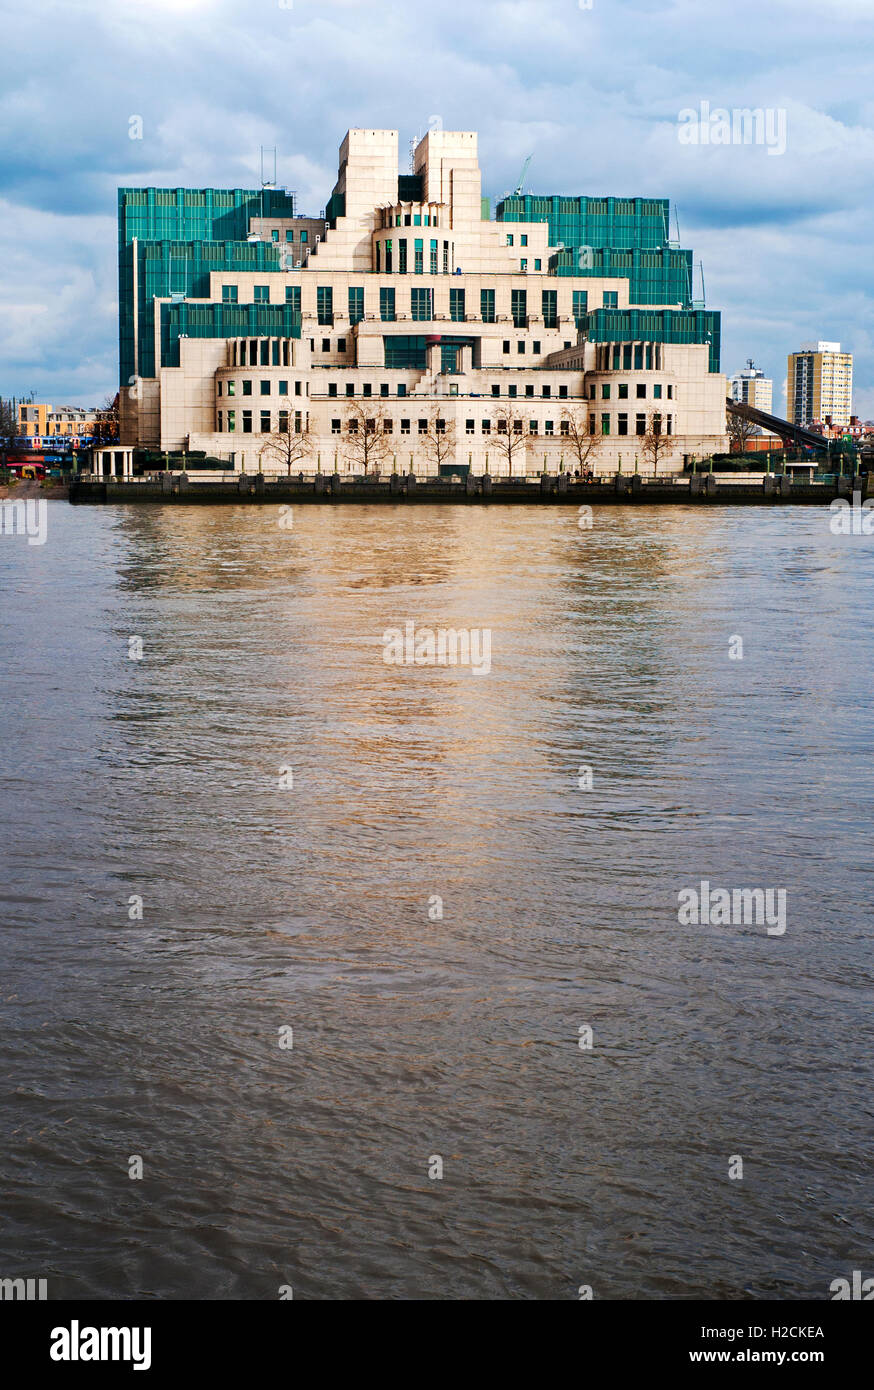 The SIS  MI6 MI5 building, reflection in river Thames London Stock Photo